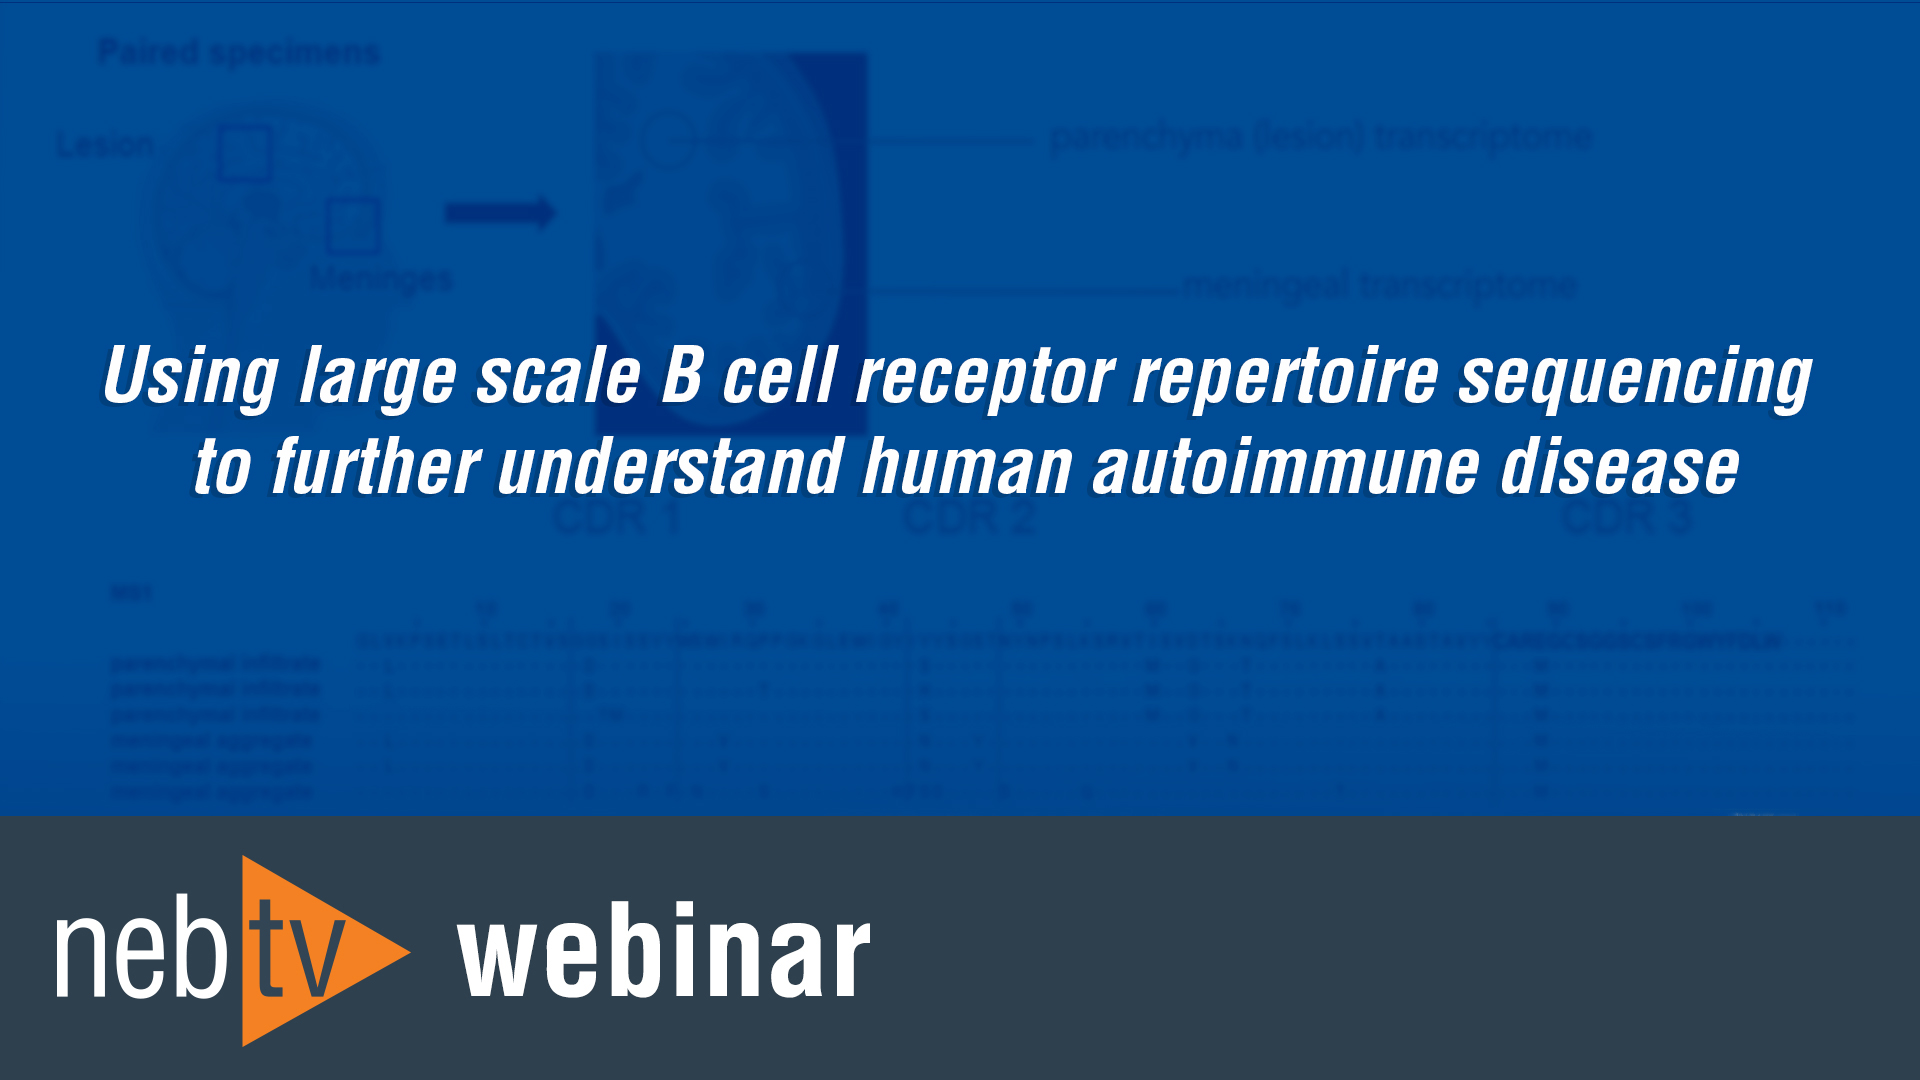 Using large scale B cell receptor repertoire sequencing to further understand human autoimmune disease